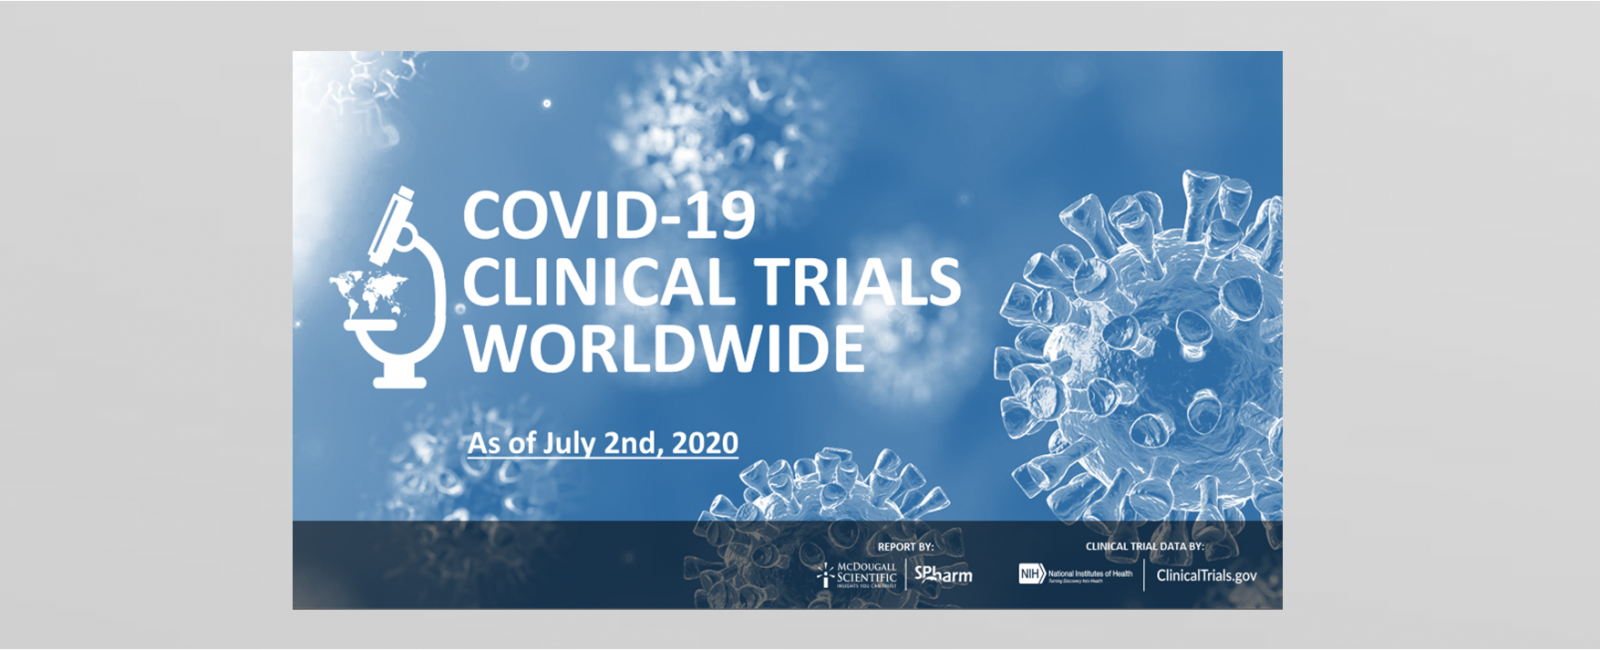 Worldwide Covid-19 Clinical Trials numbers for June